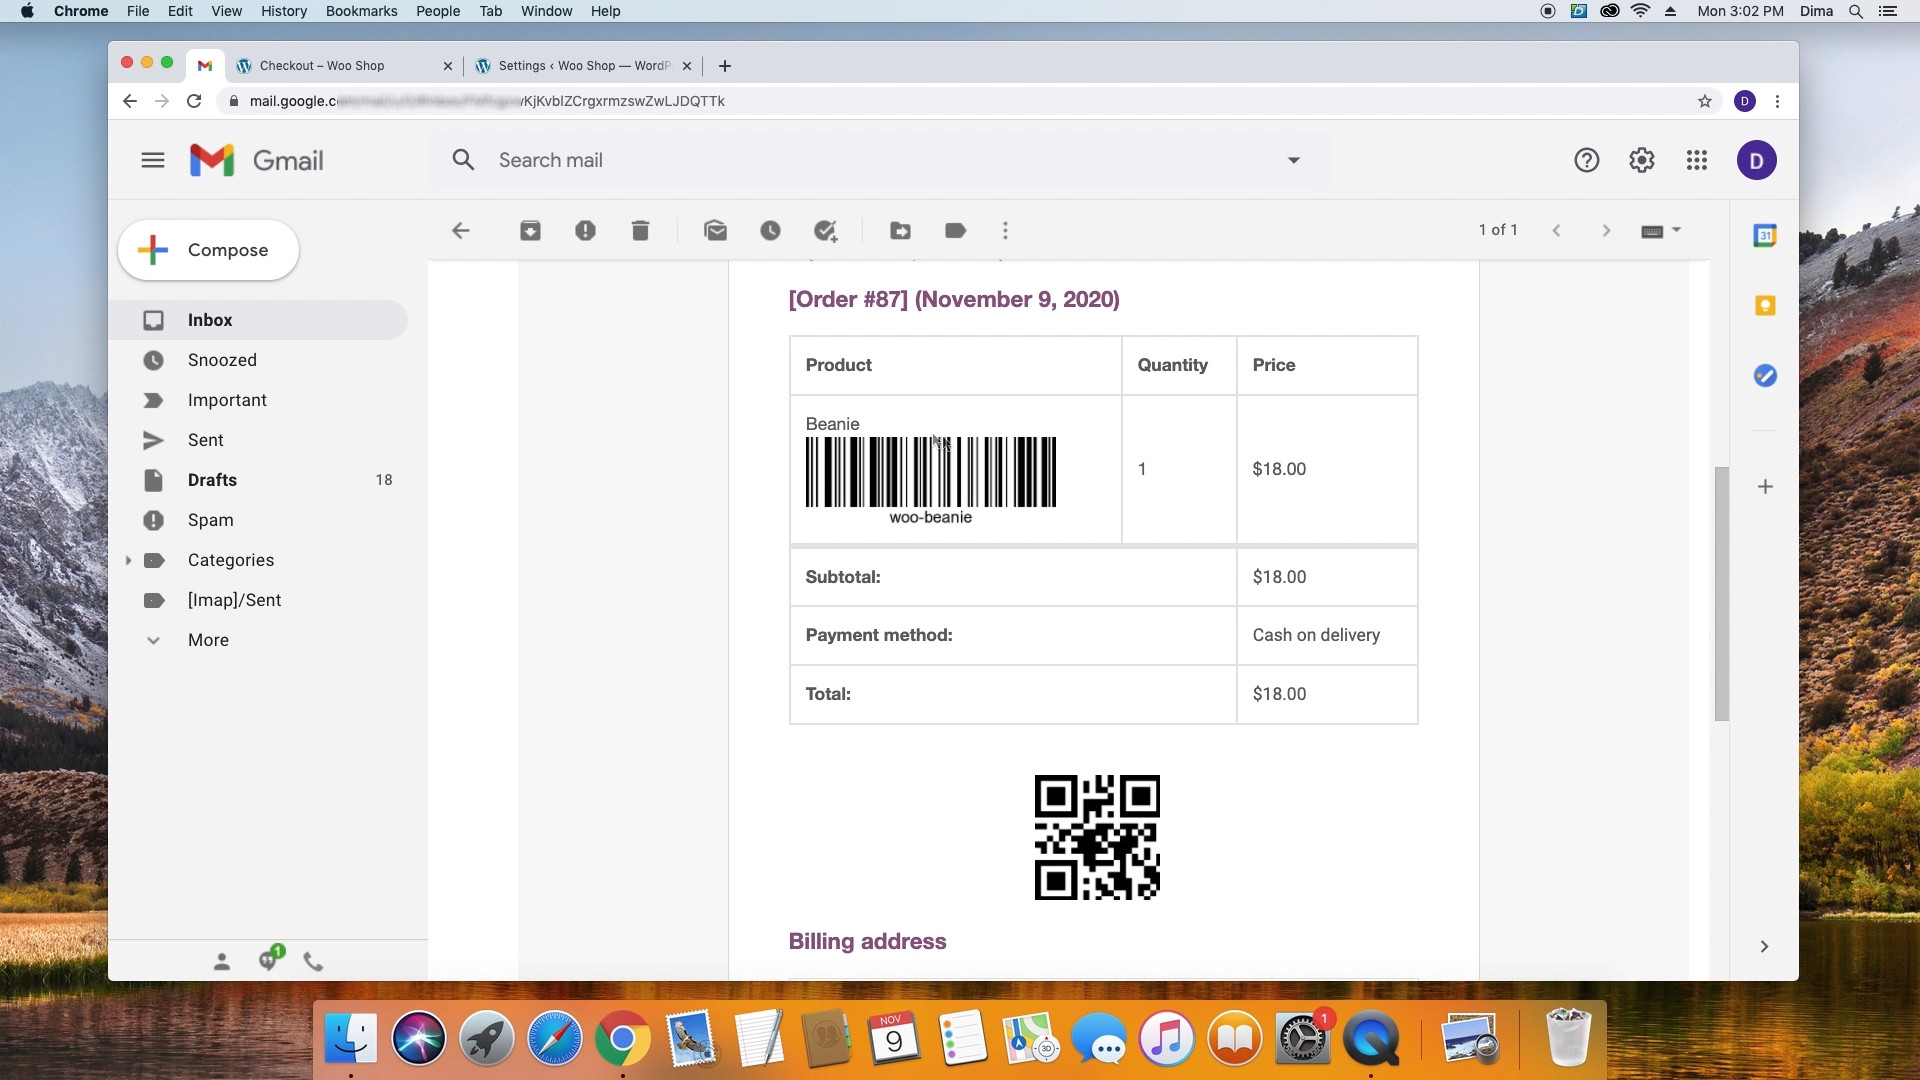 Display barcode in order email